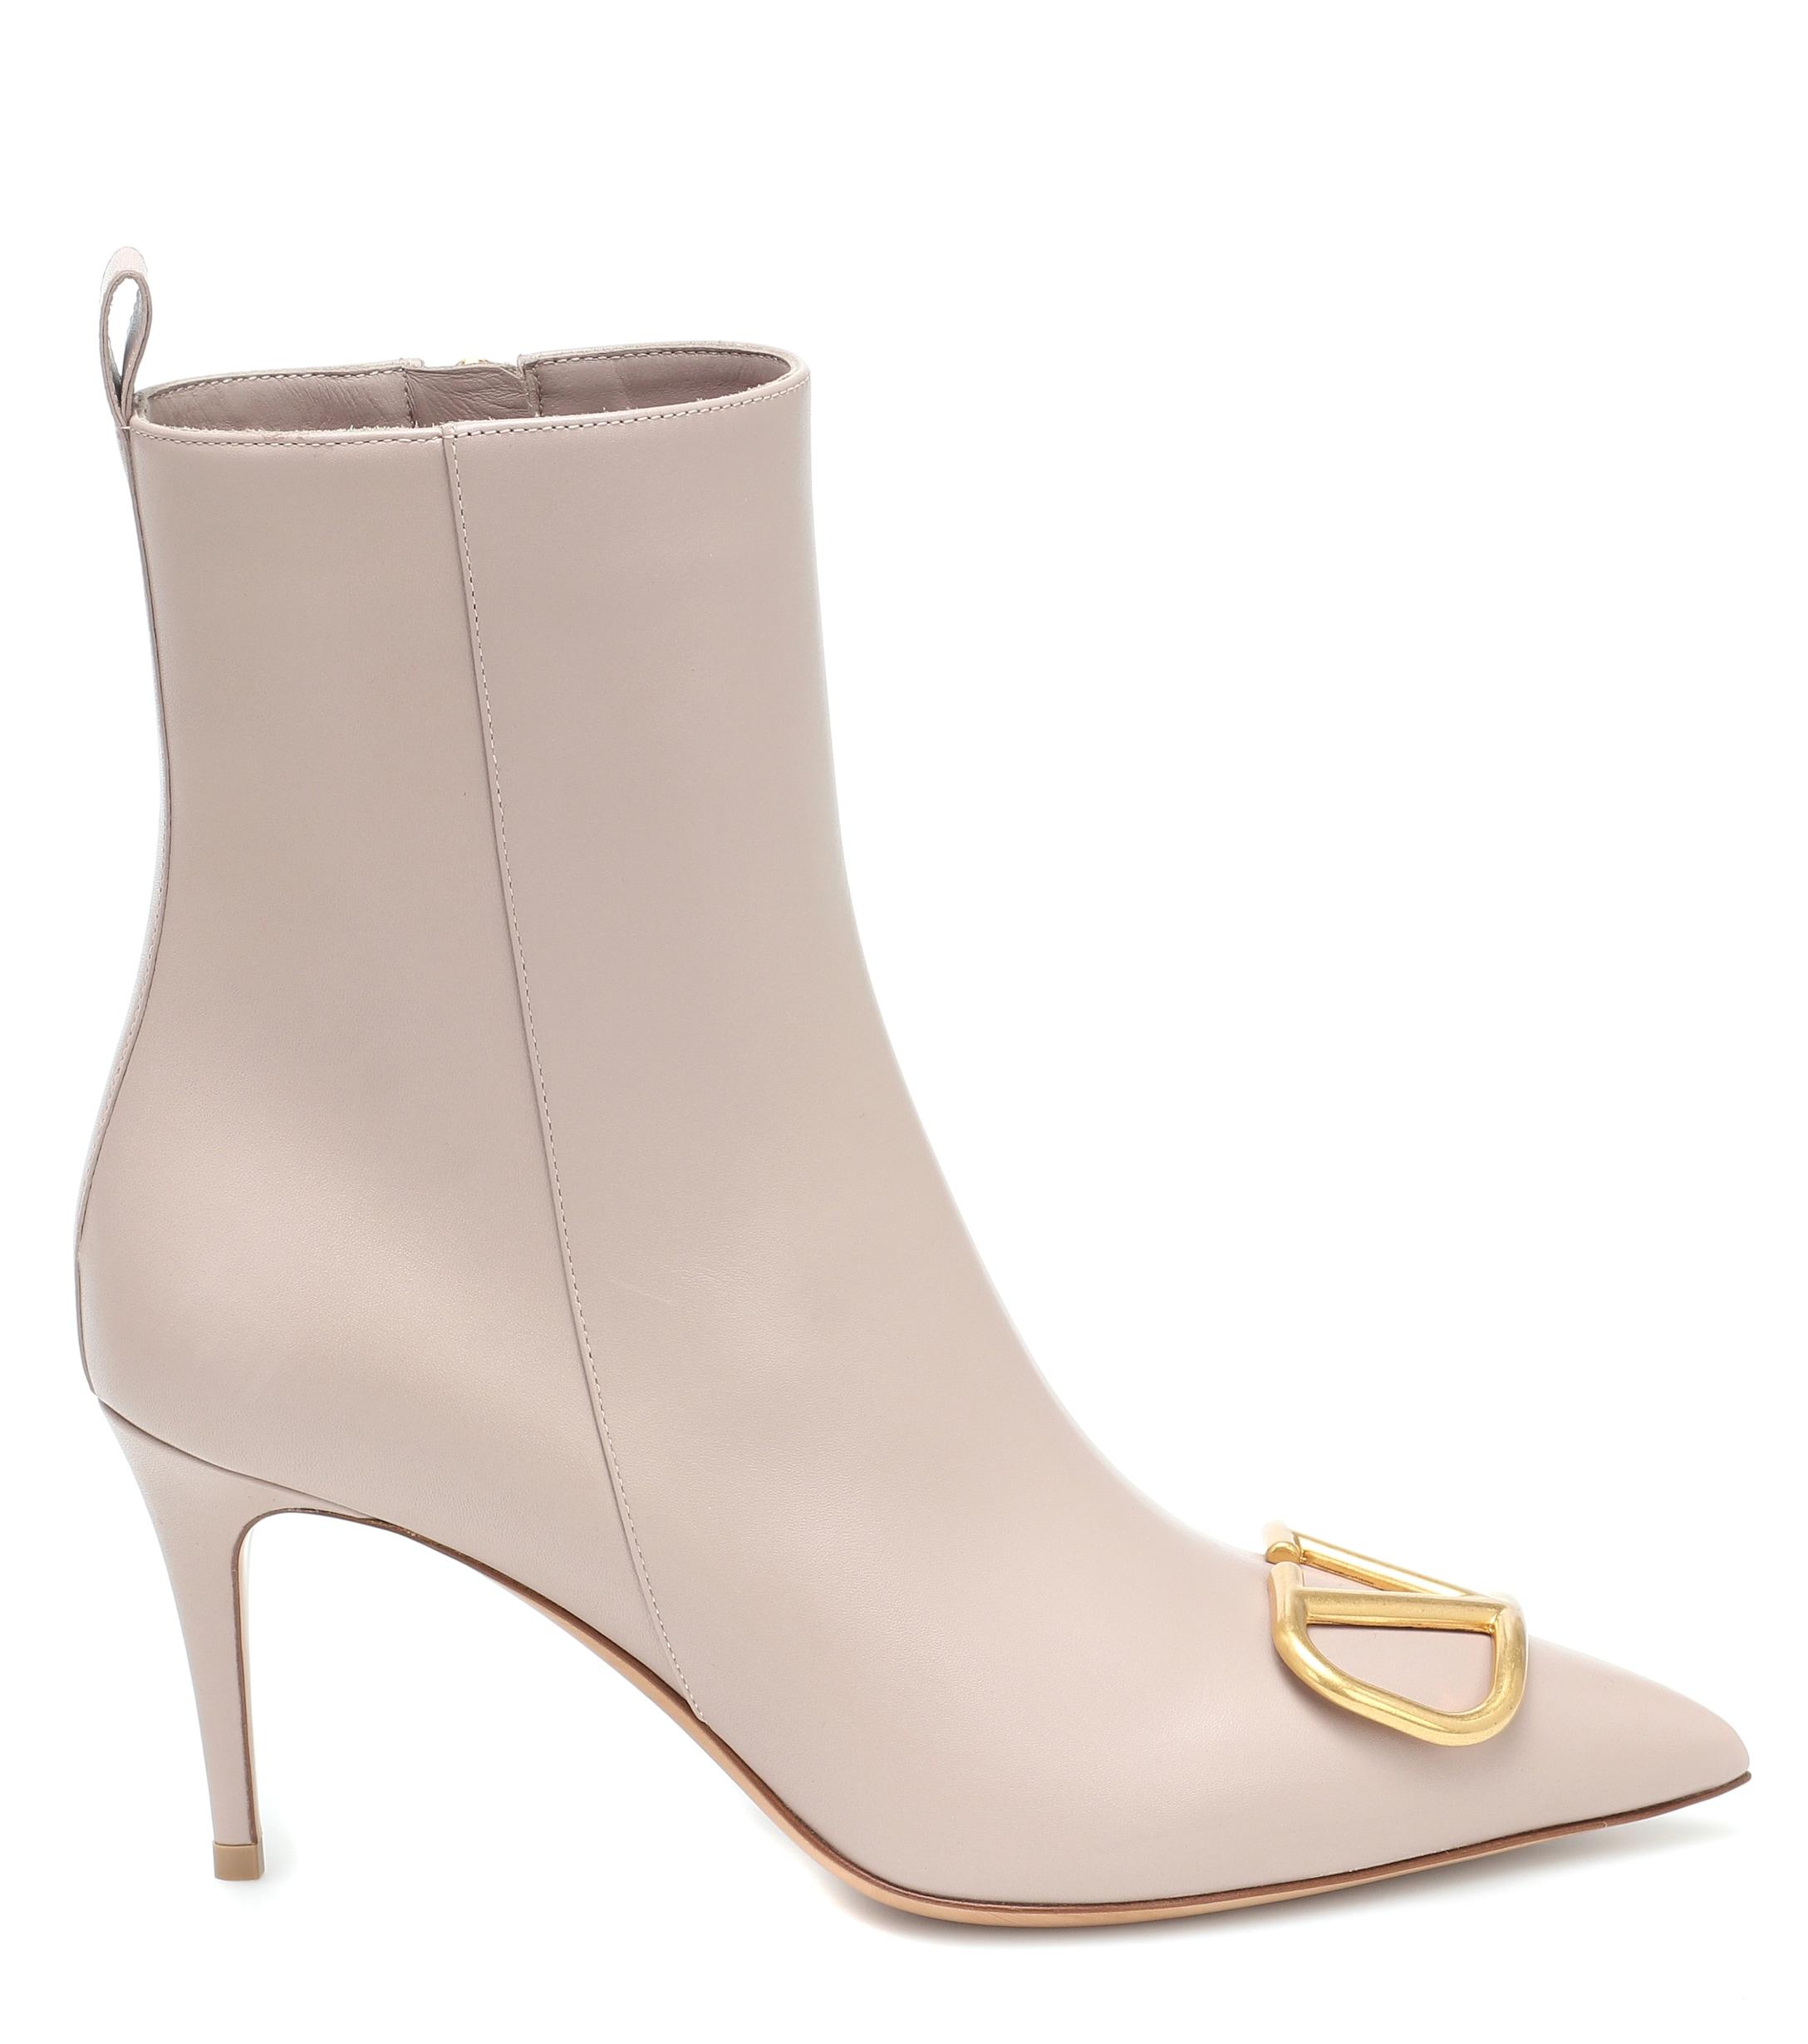 Valentino Garavani Vlogo Leather Ankle Boots in Pink - Lyst